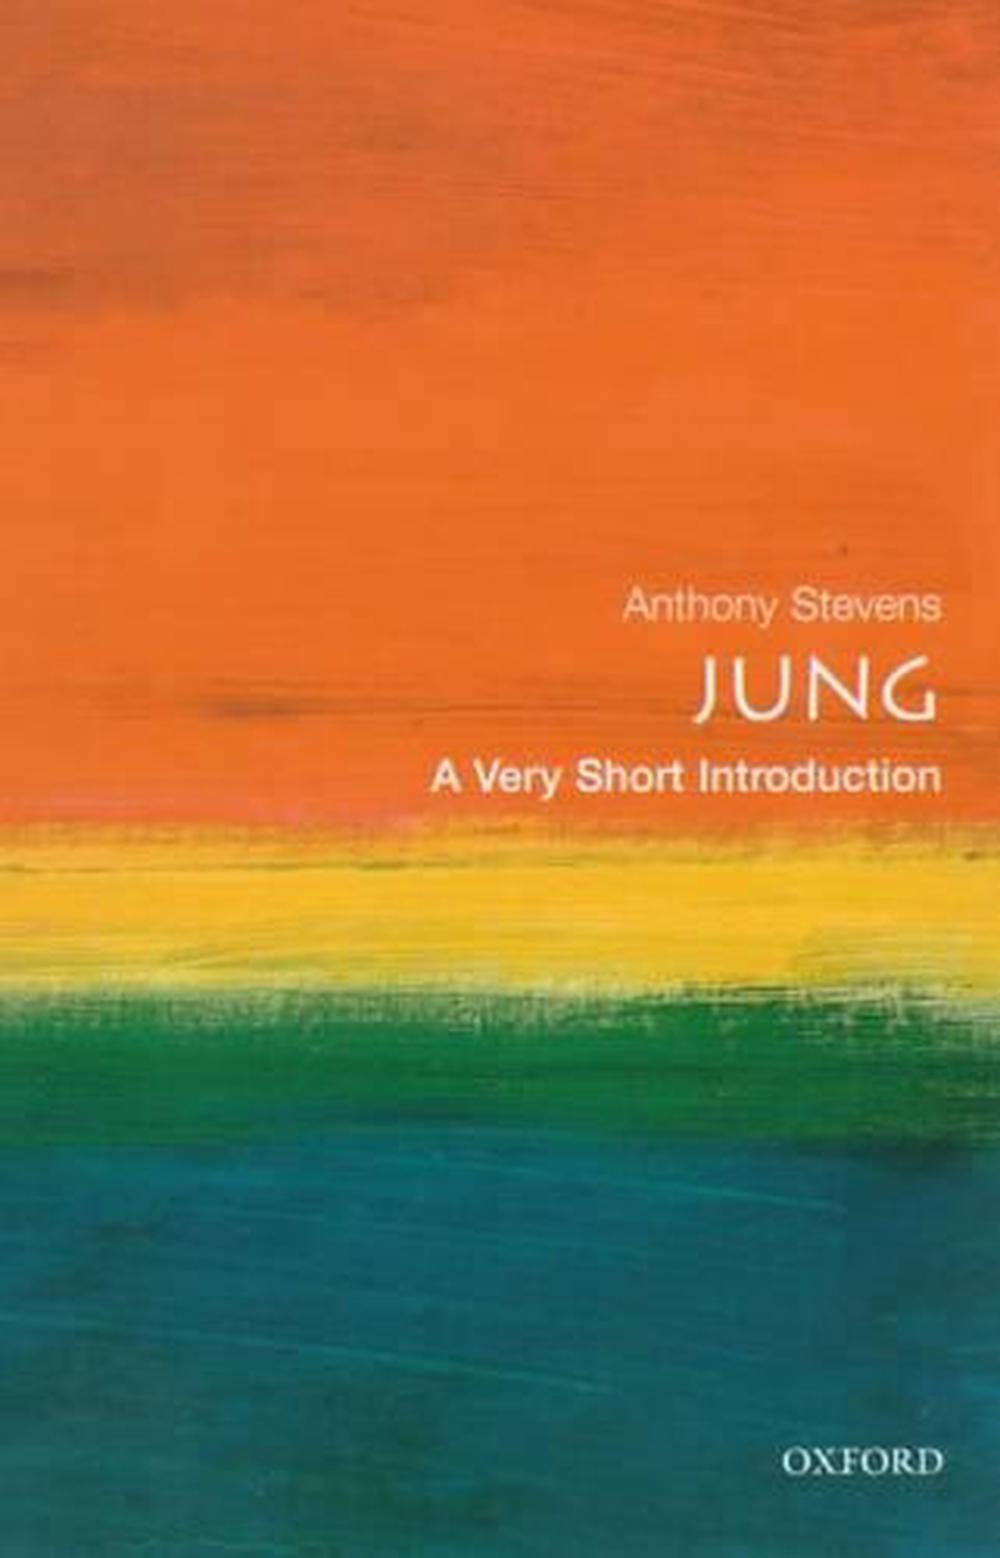 a very short introduction to jung